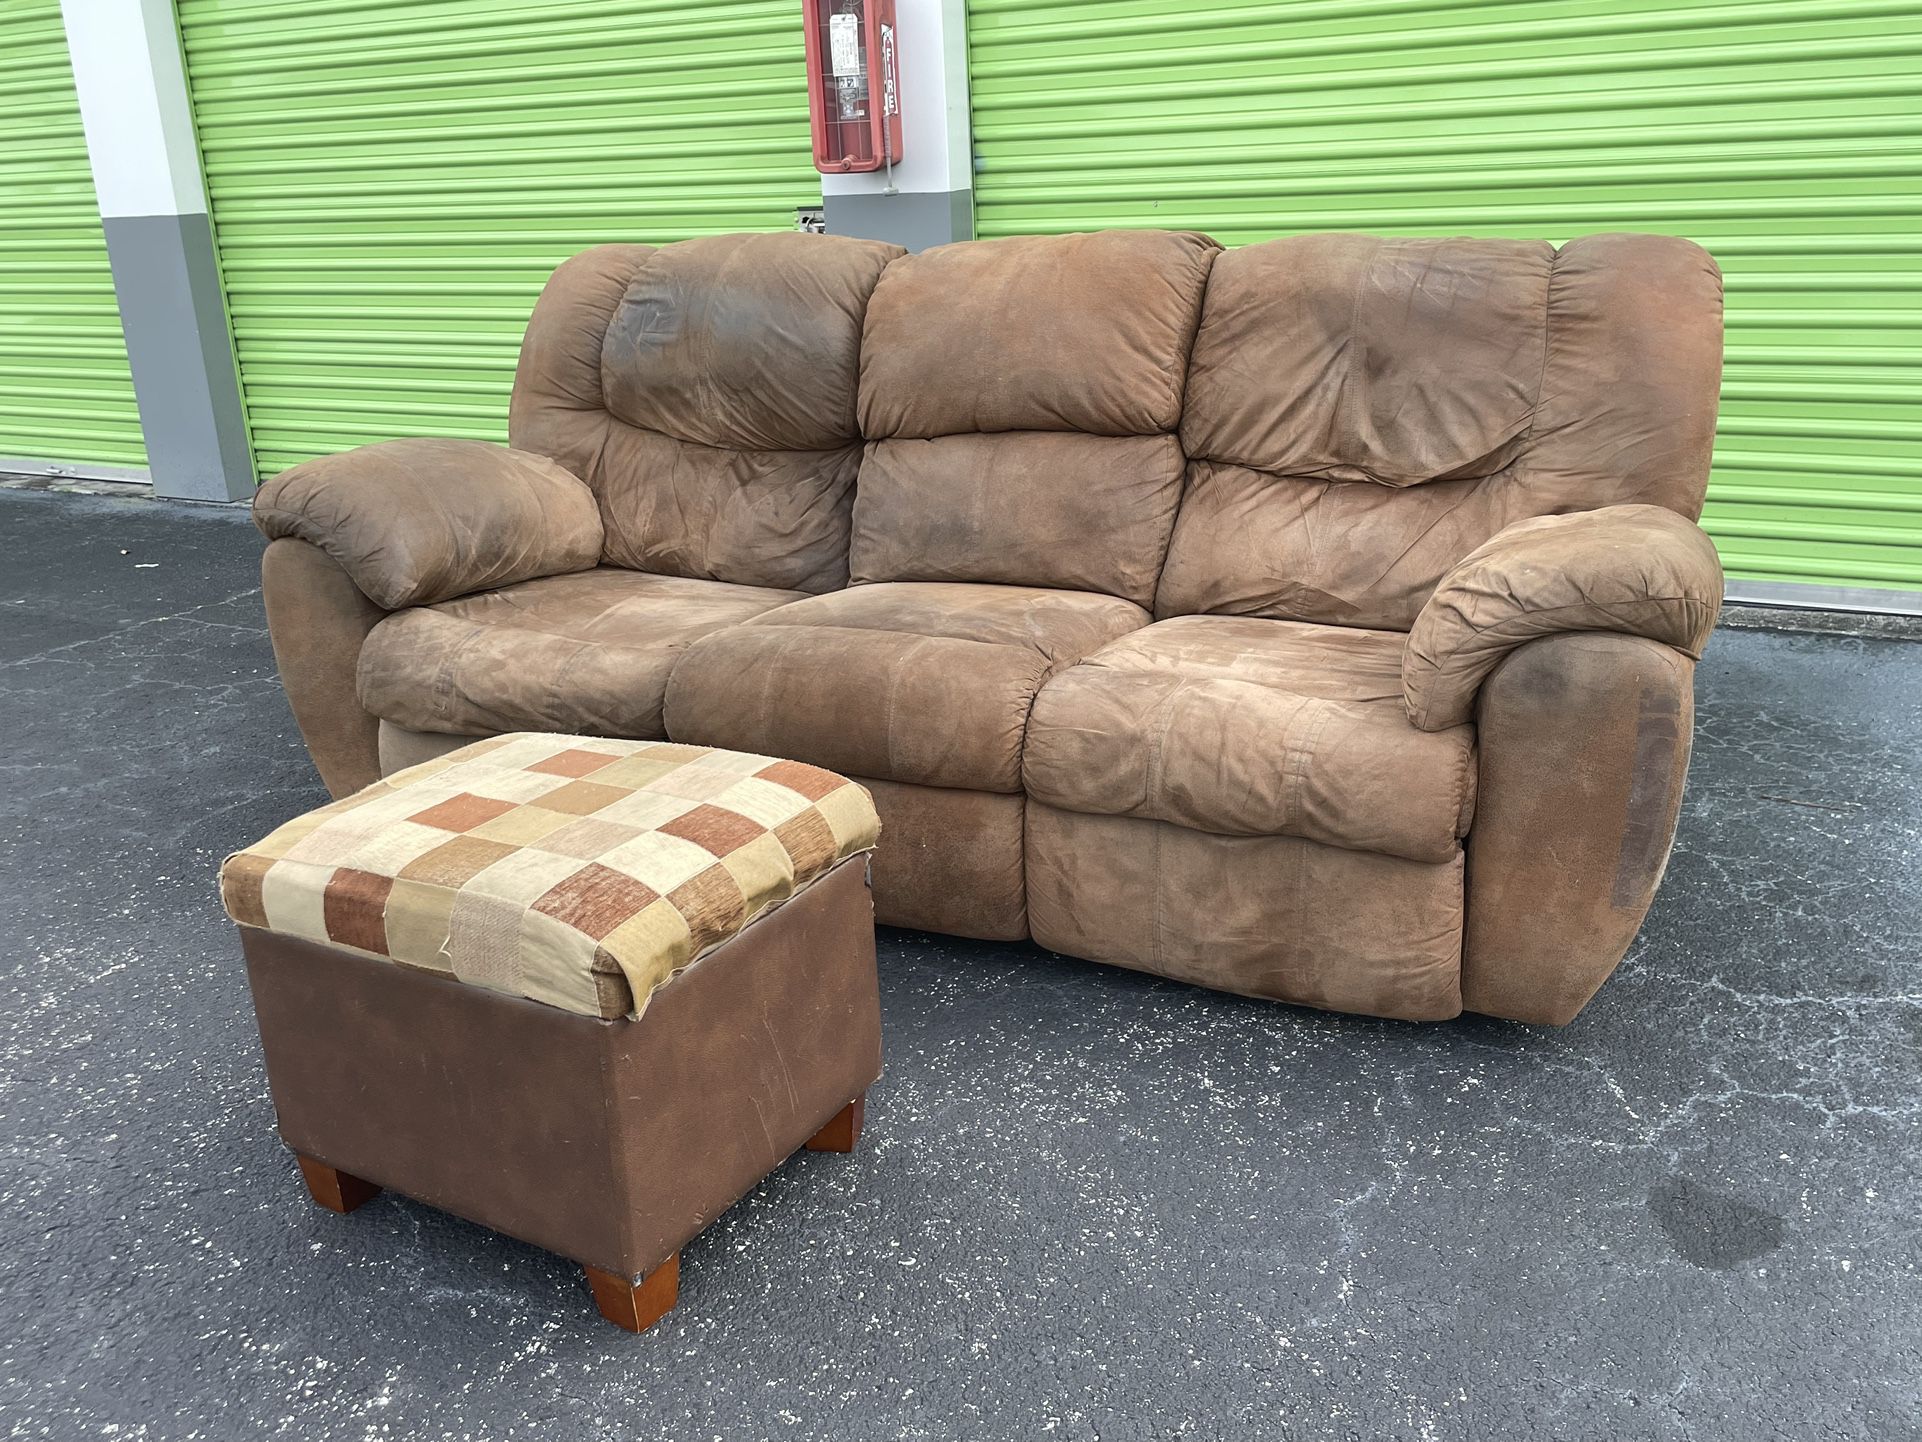 Recliner Couch And Storage Ottoman